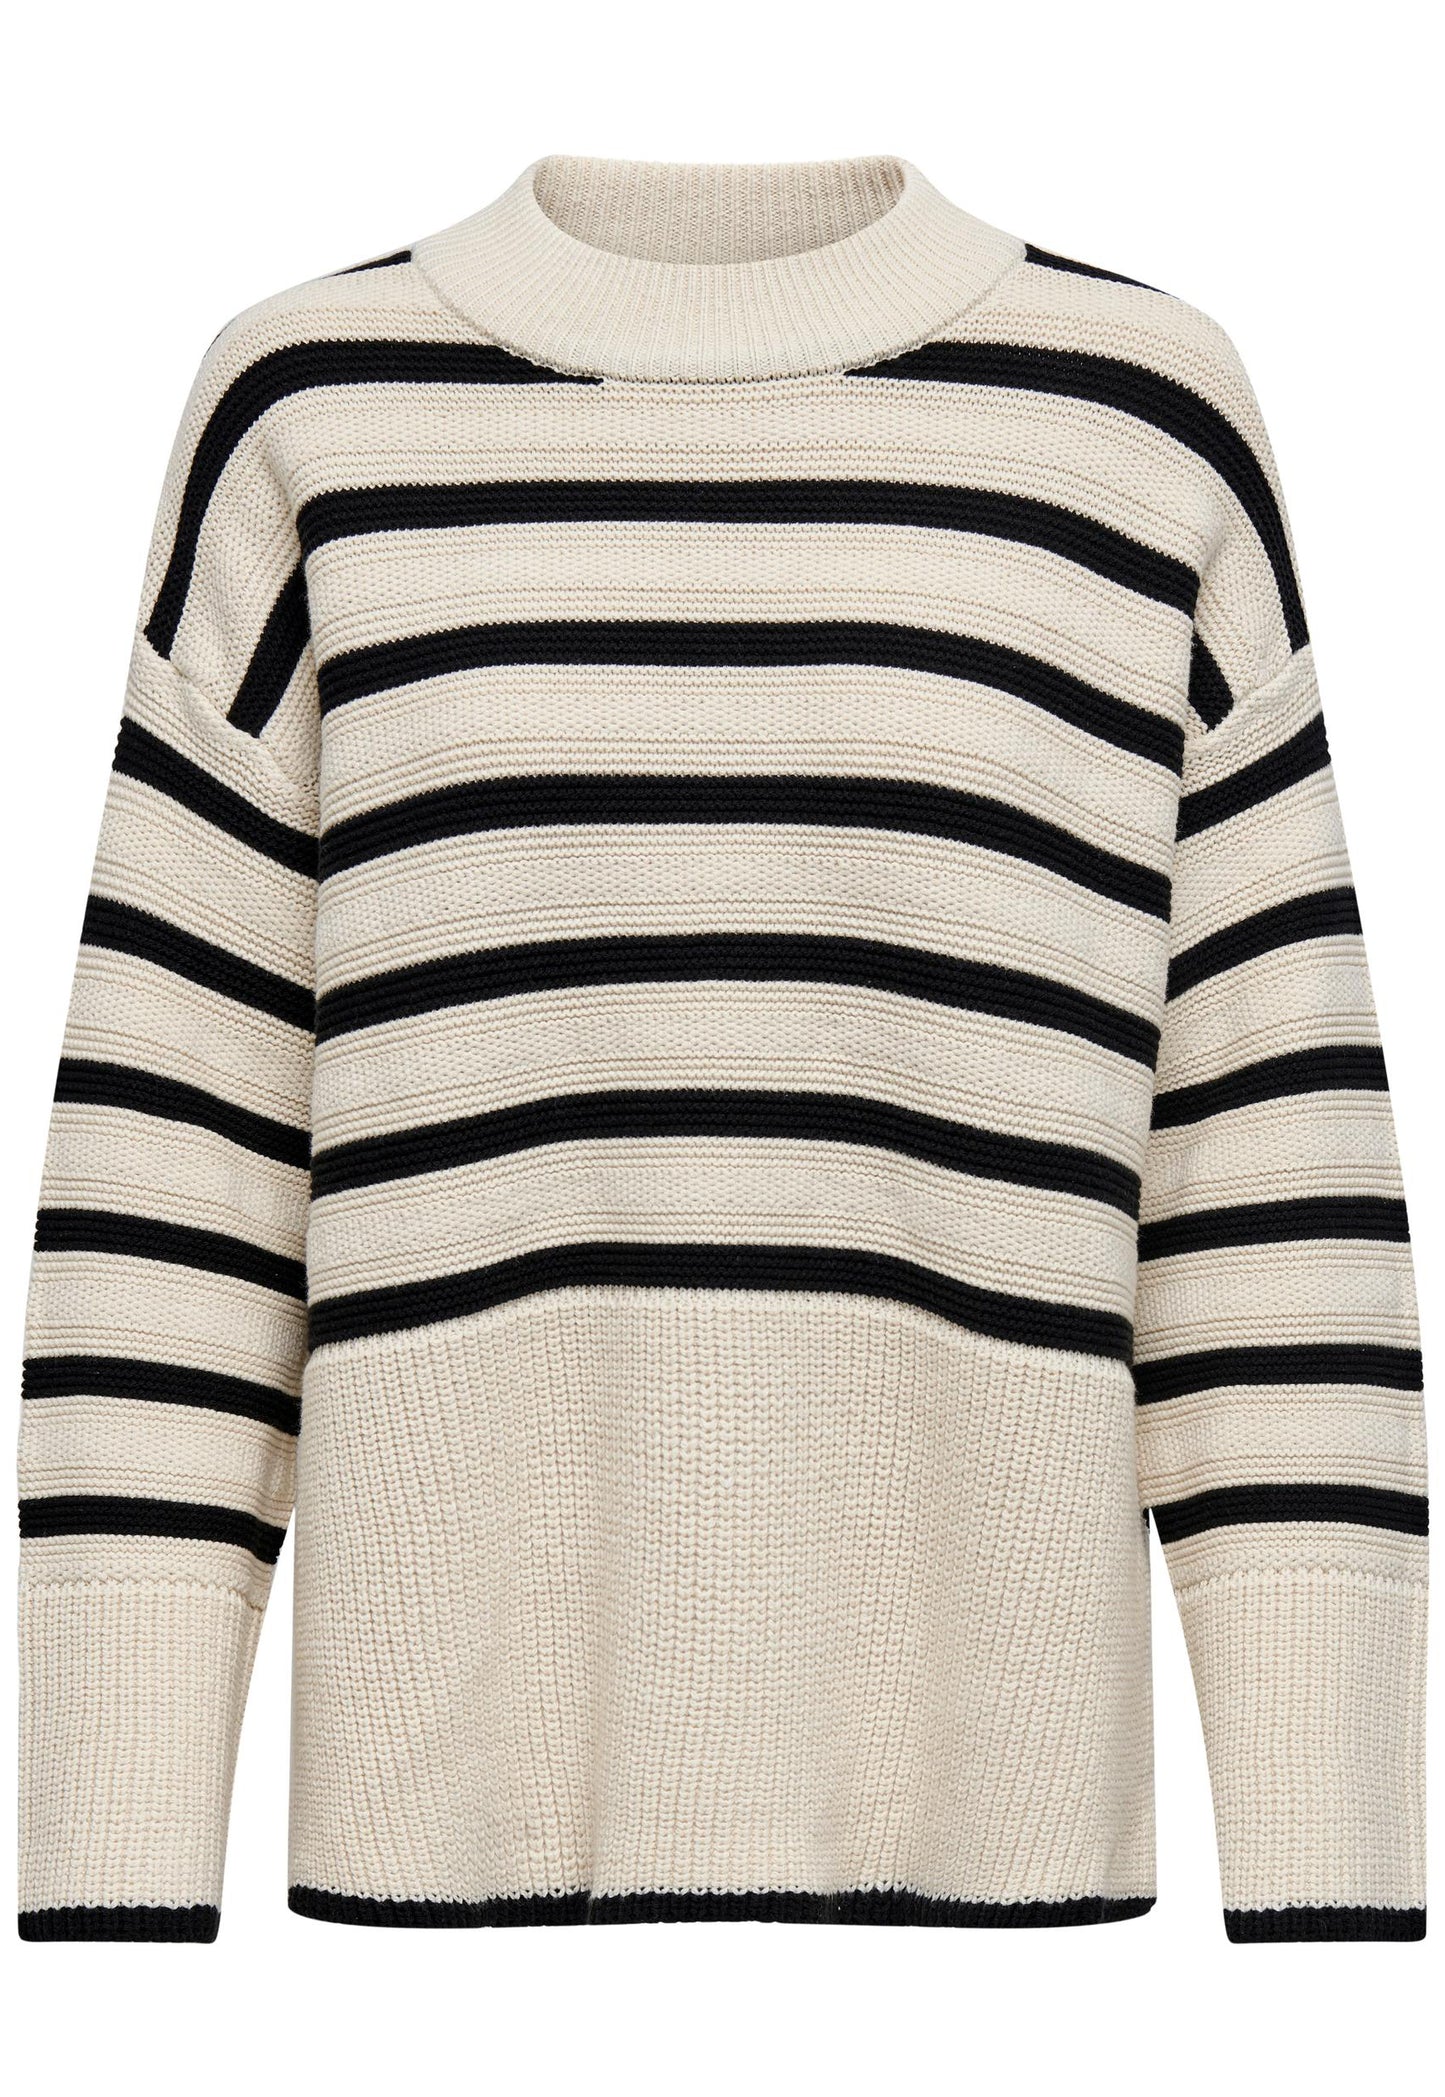 
                  
                    ONLY Sia Chunky Knit Stripe Jumper in Cream & Black - One Nation Clothing
                  
                